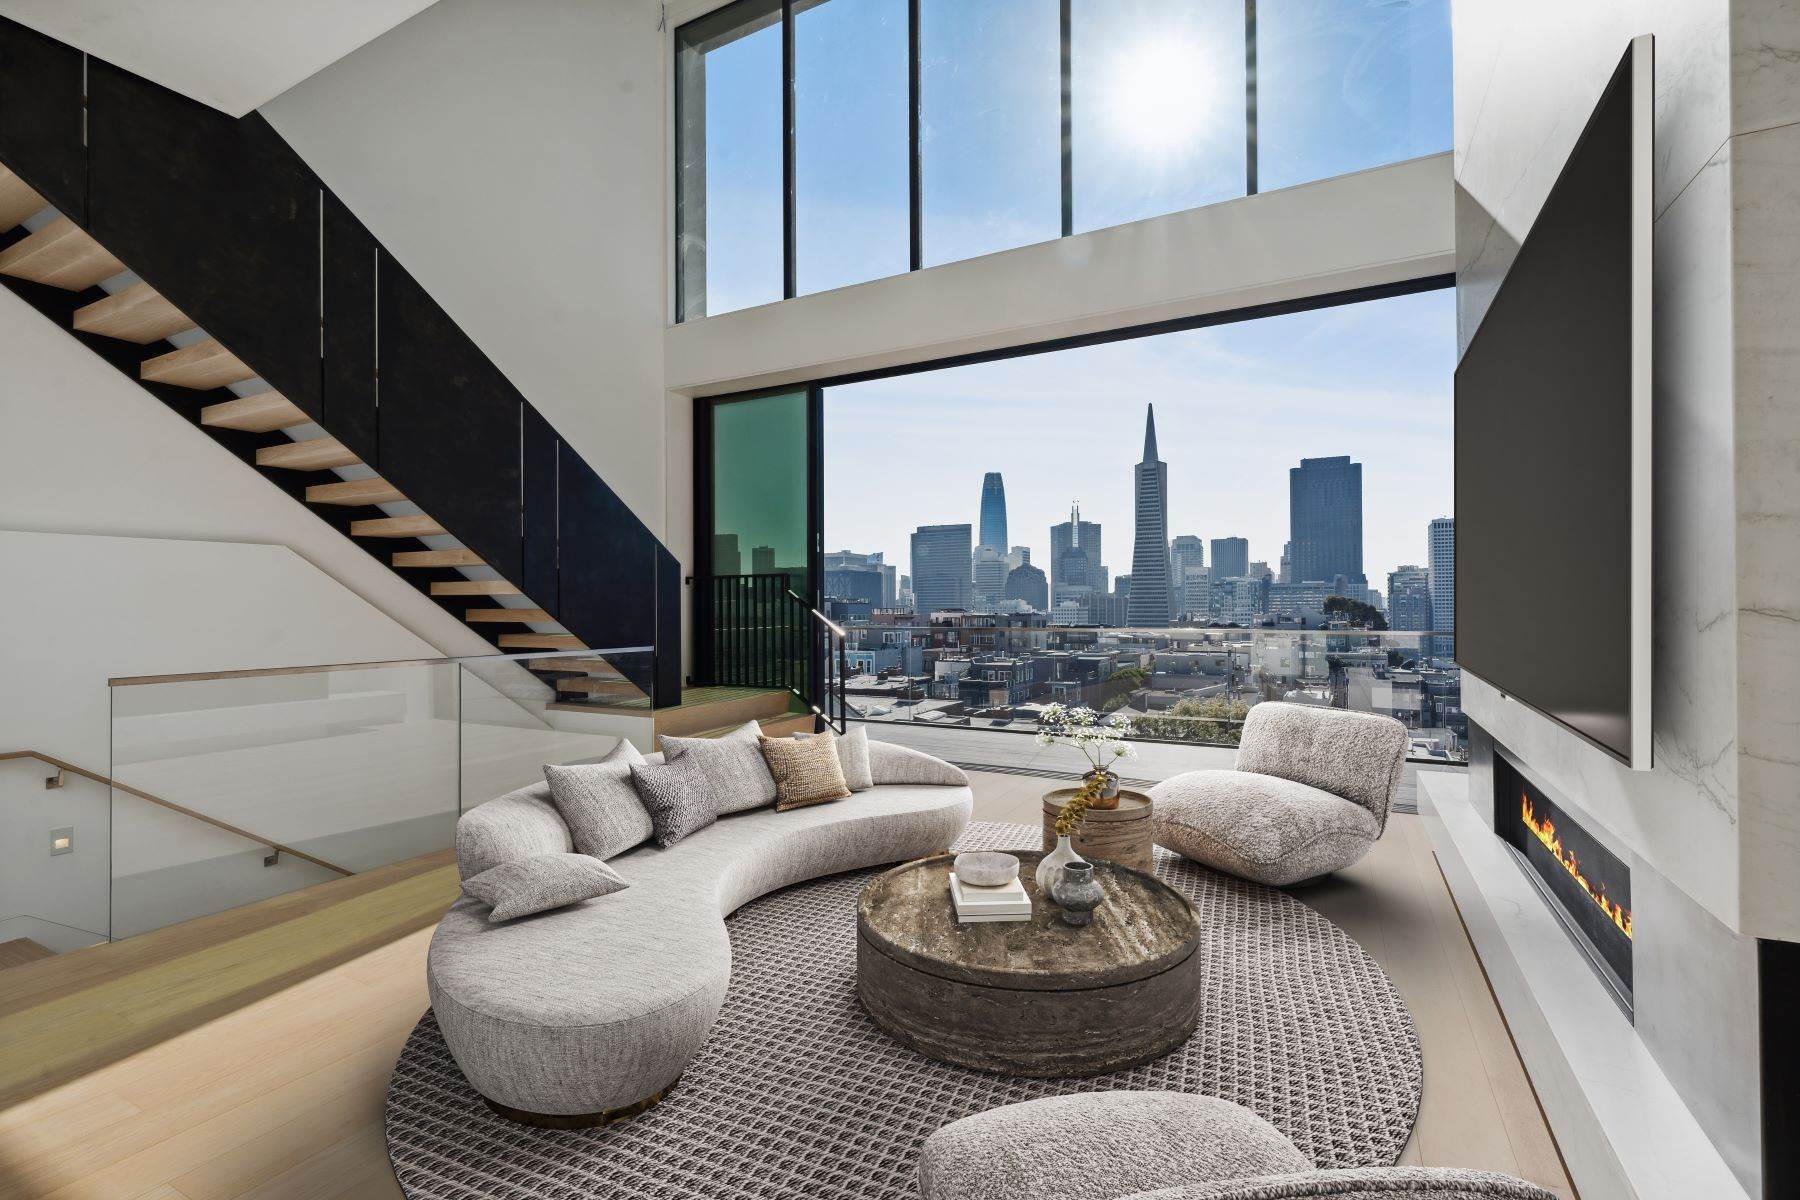 Single Family Homes for Active at Contemporary Loft-like Home 115 Telegraph Hill Blvd San Francisco, California 94133 United States